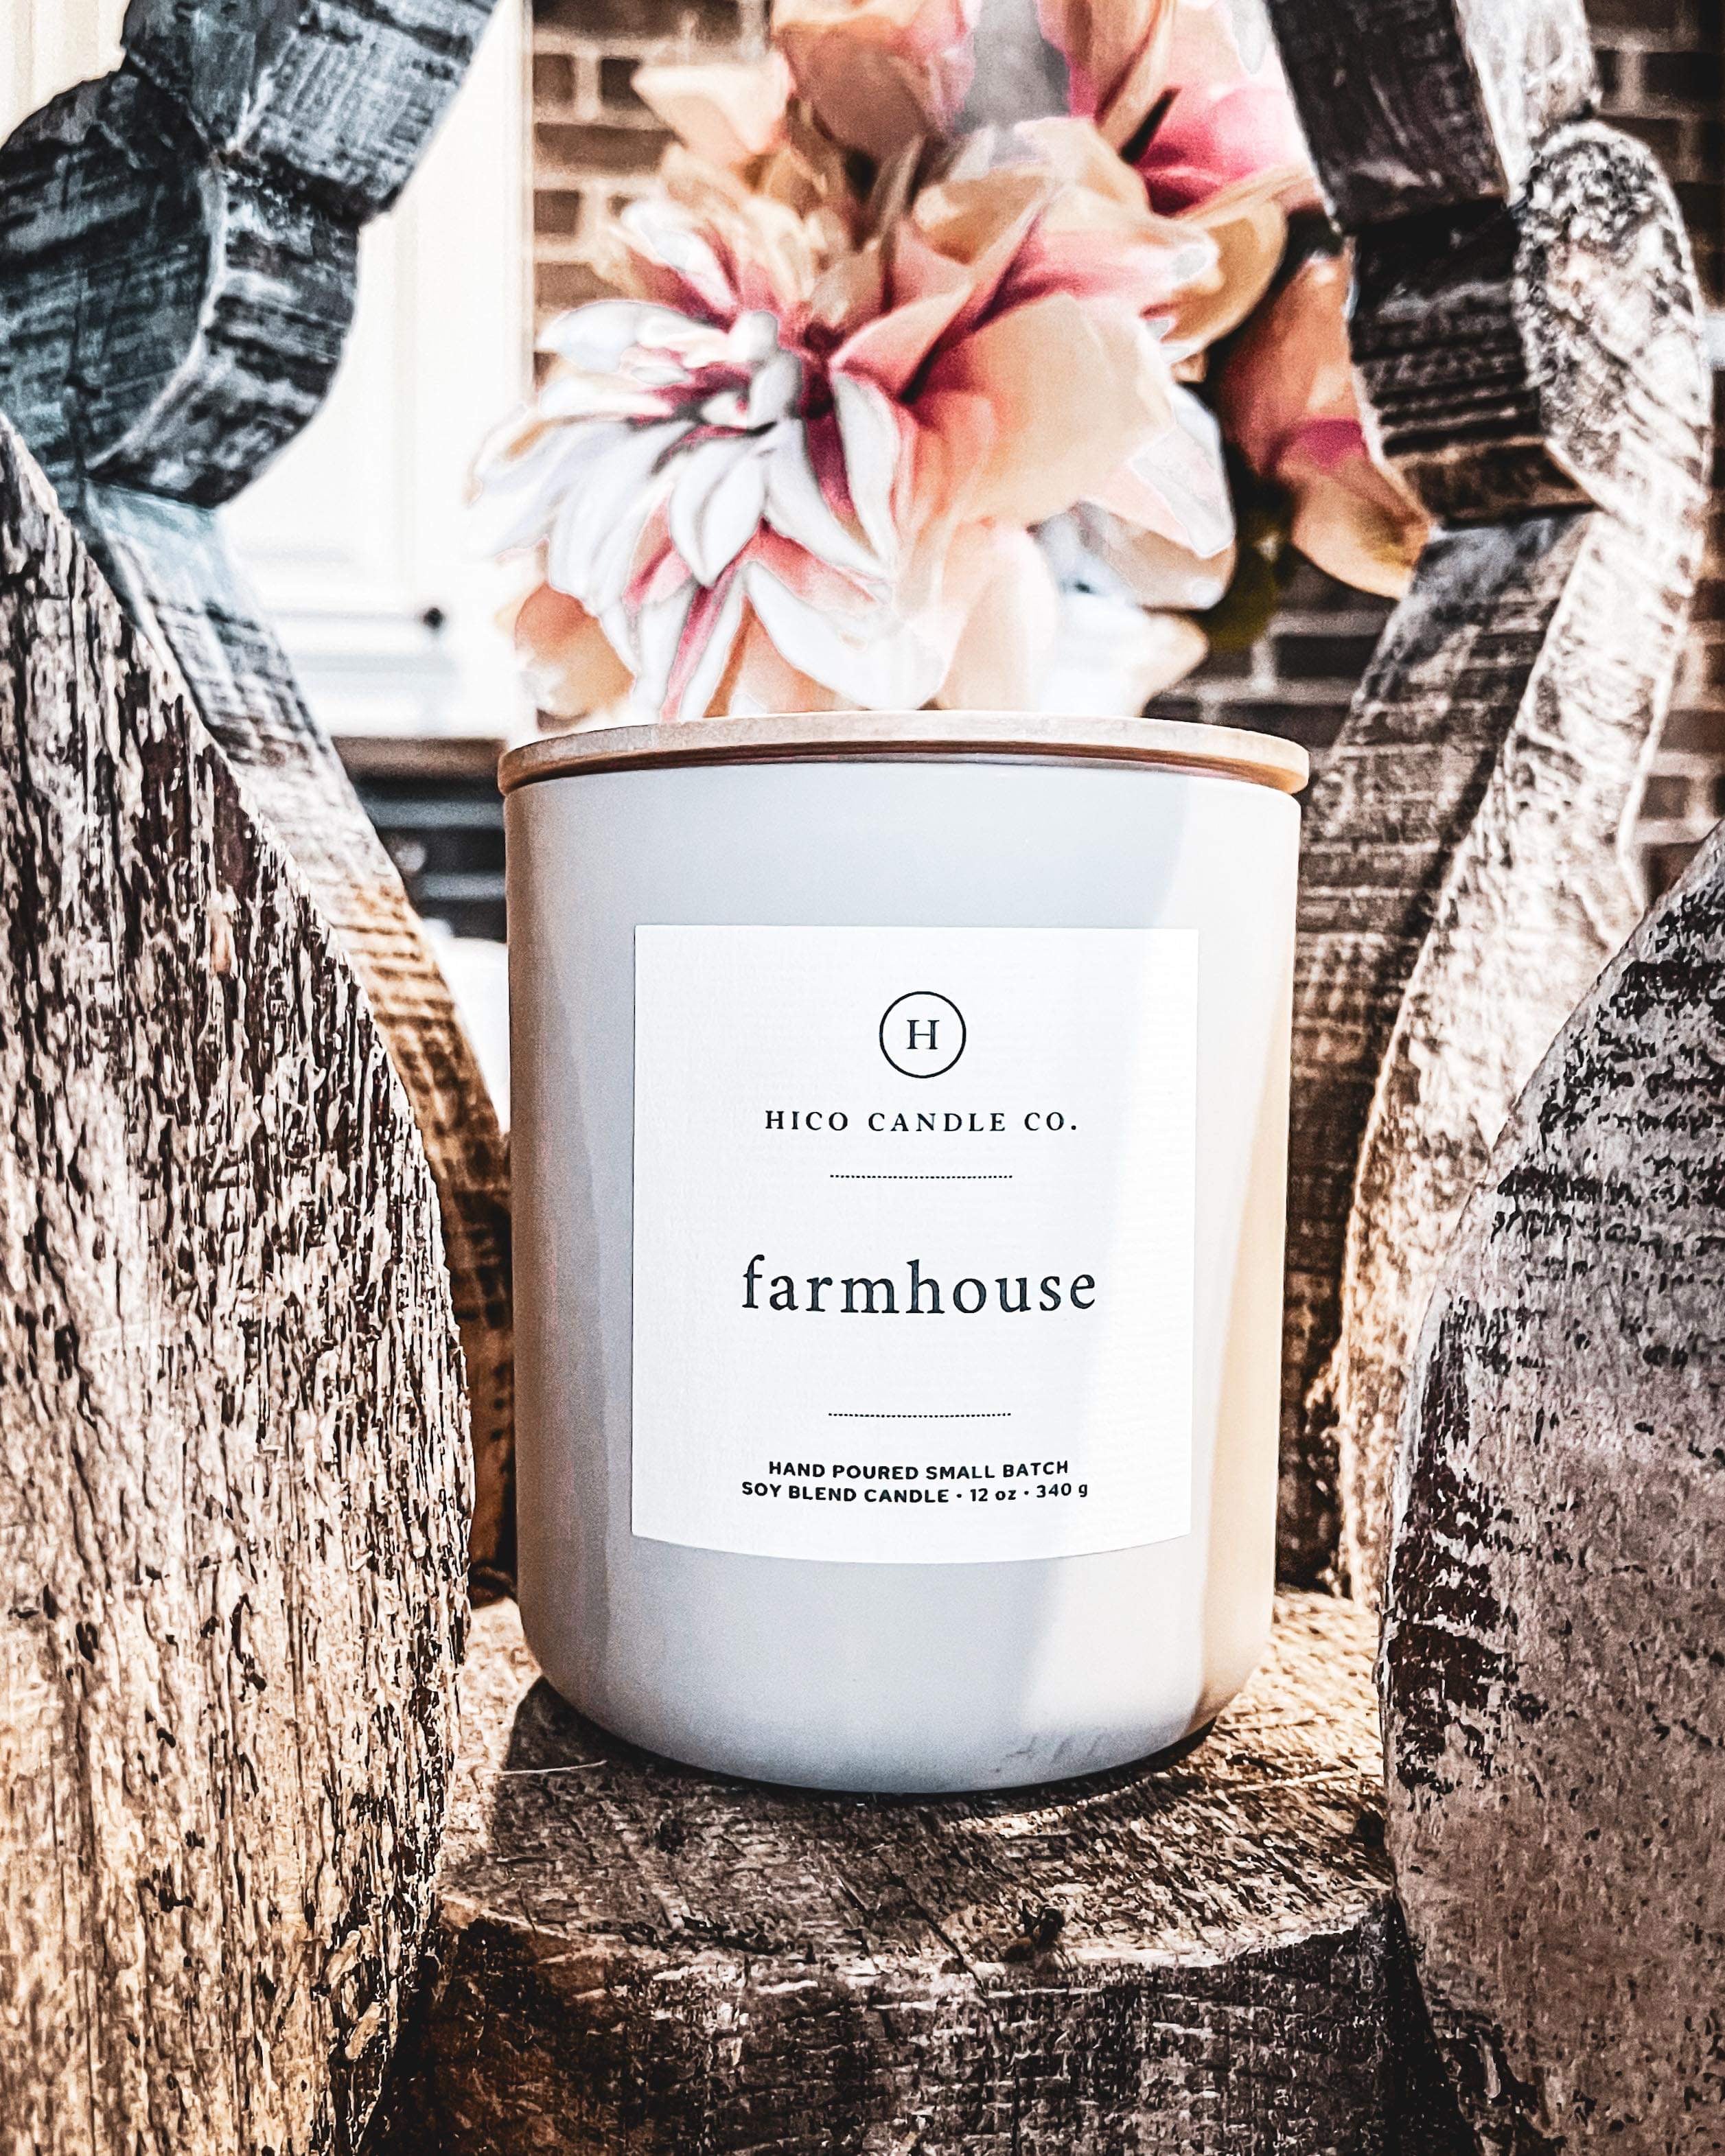 Cowgirl Freshie – Scents of Soy Candle Co.